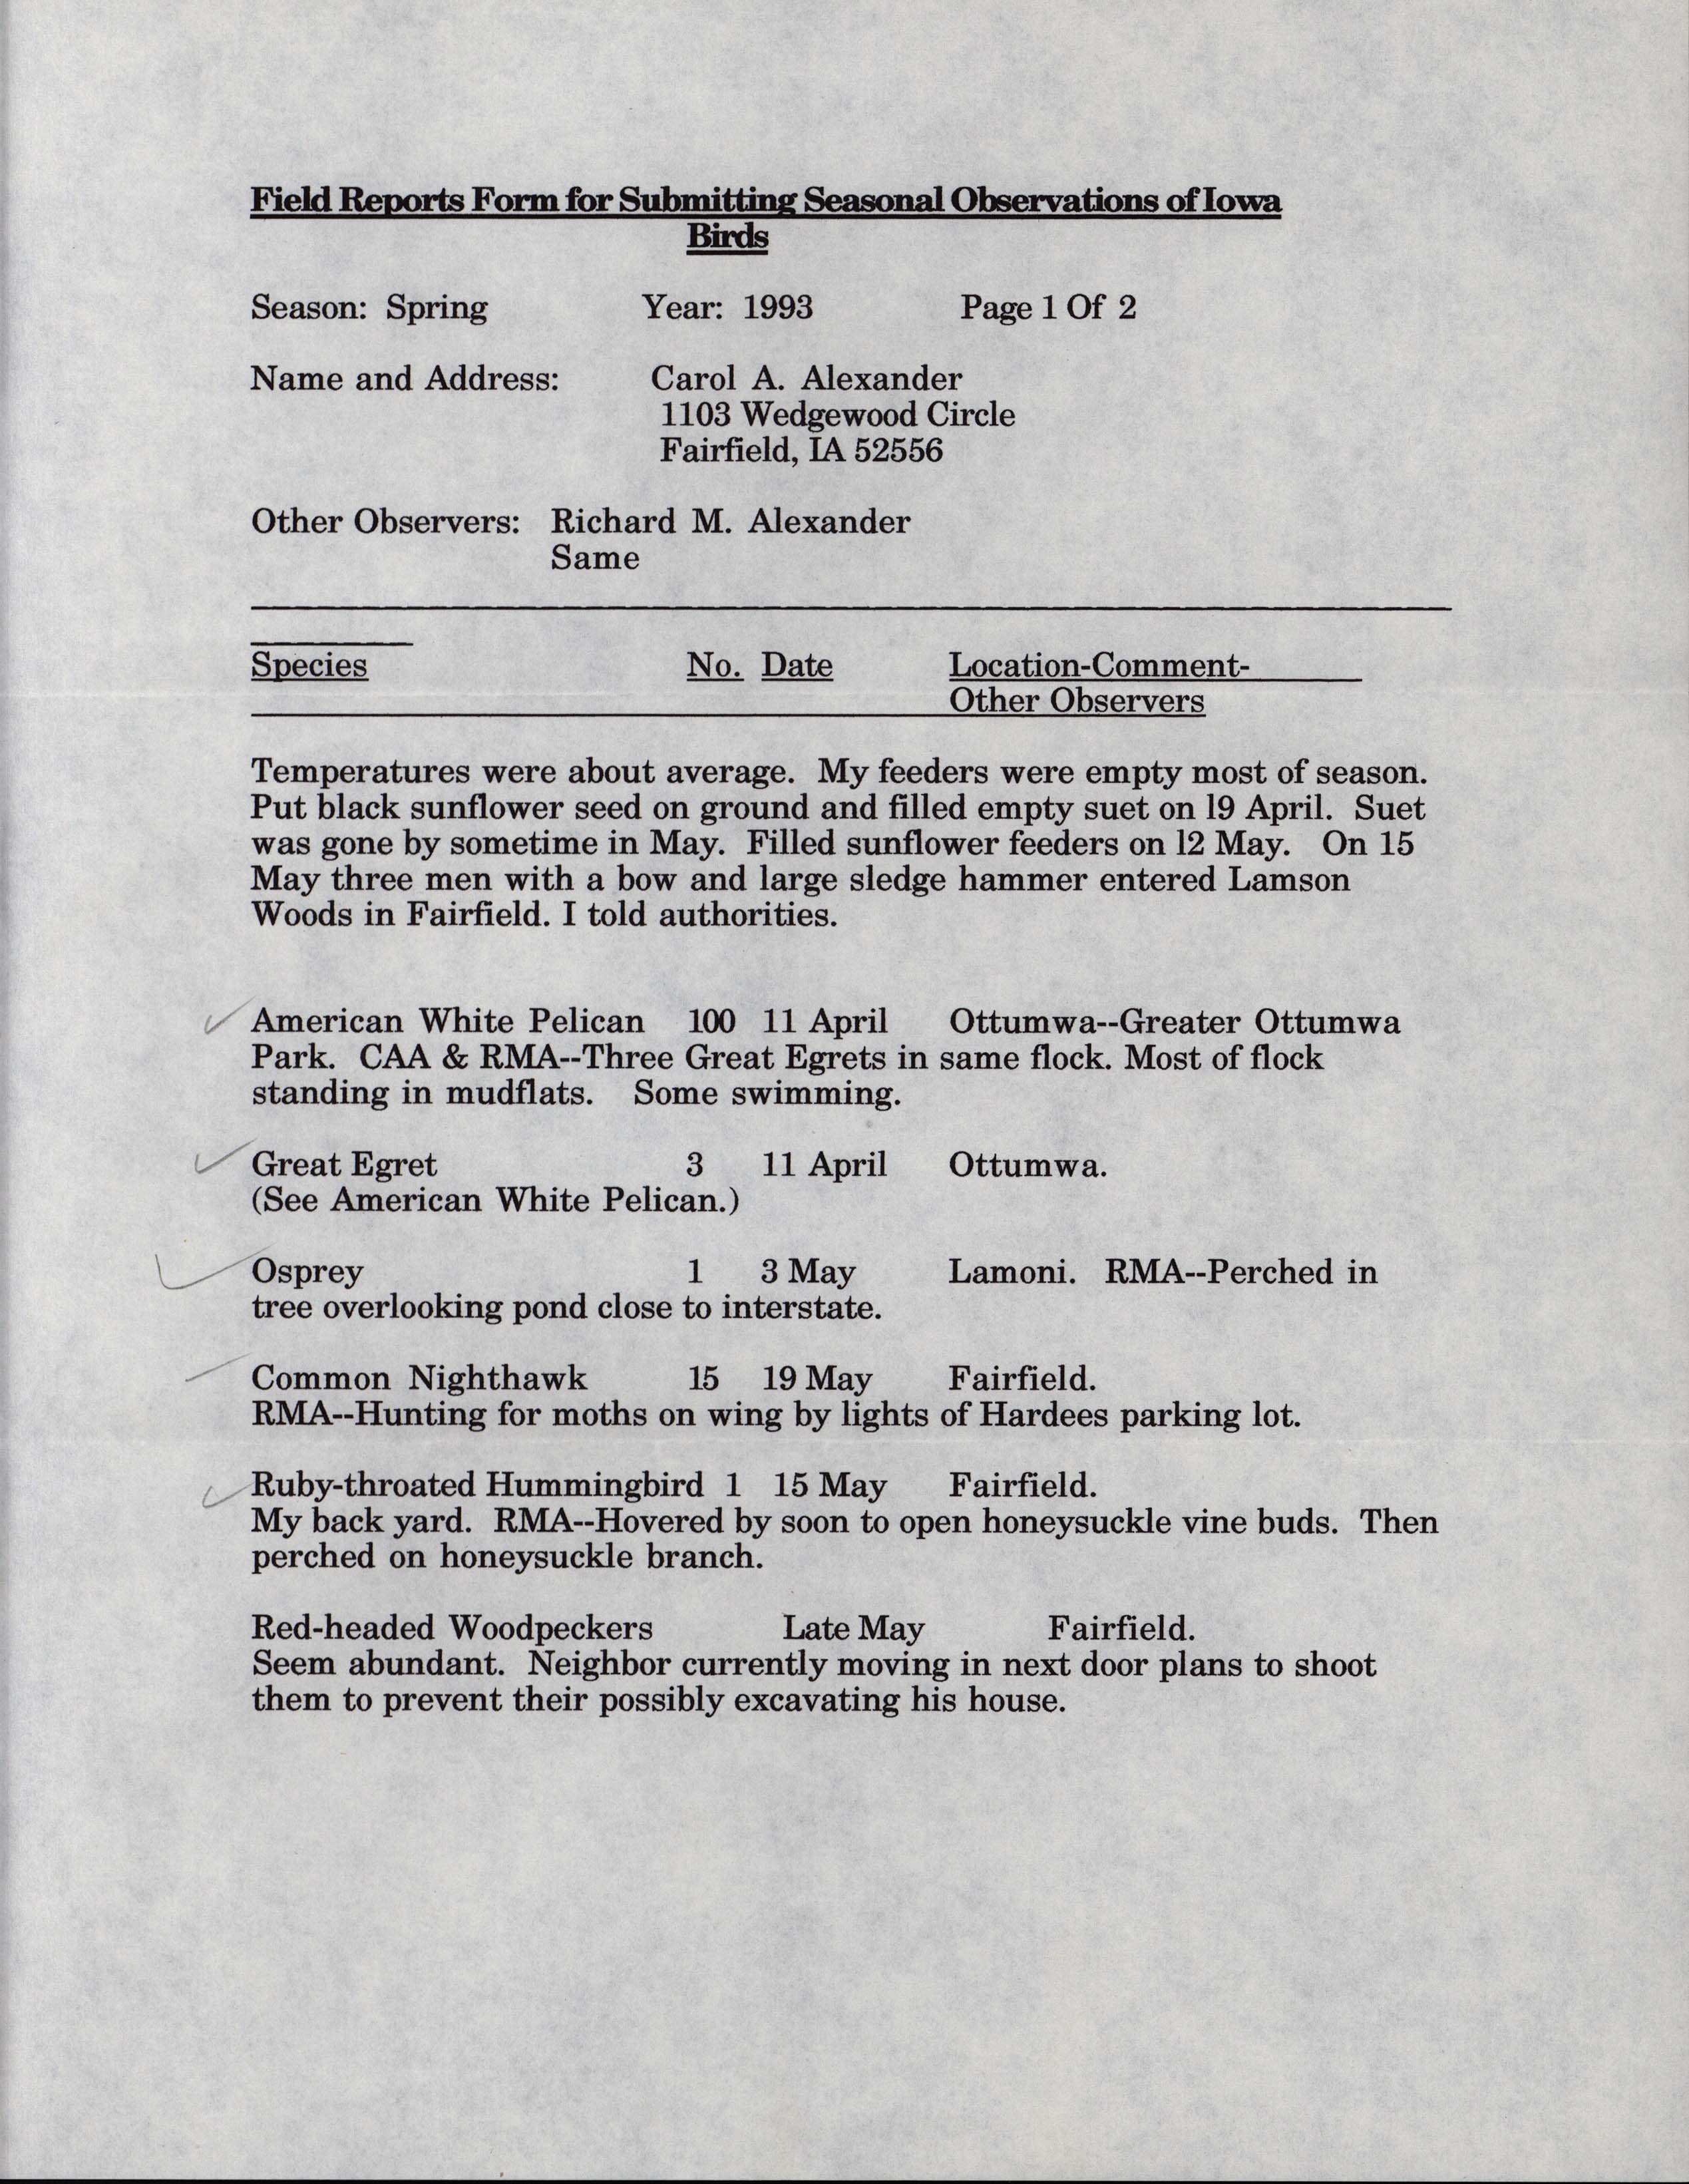 Field reports form for submitting seasonal observations of Iowa birds, Carol Alexander, Spring 1993